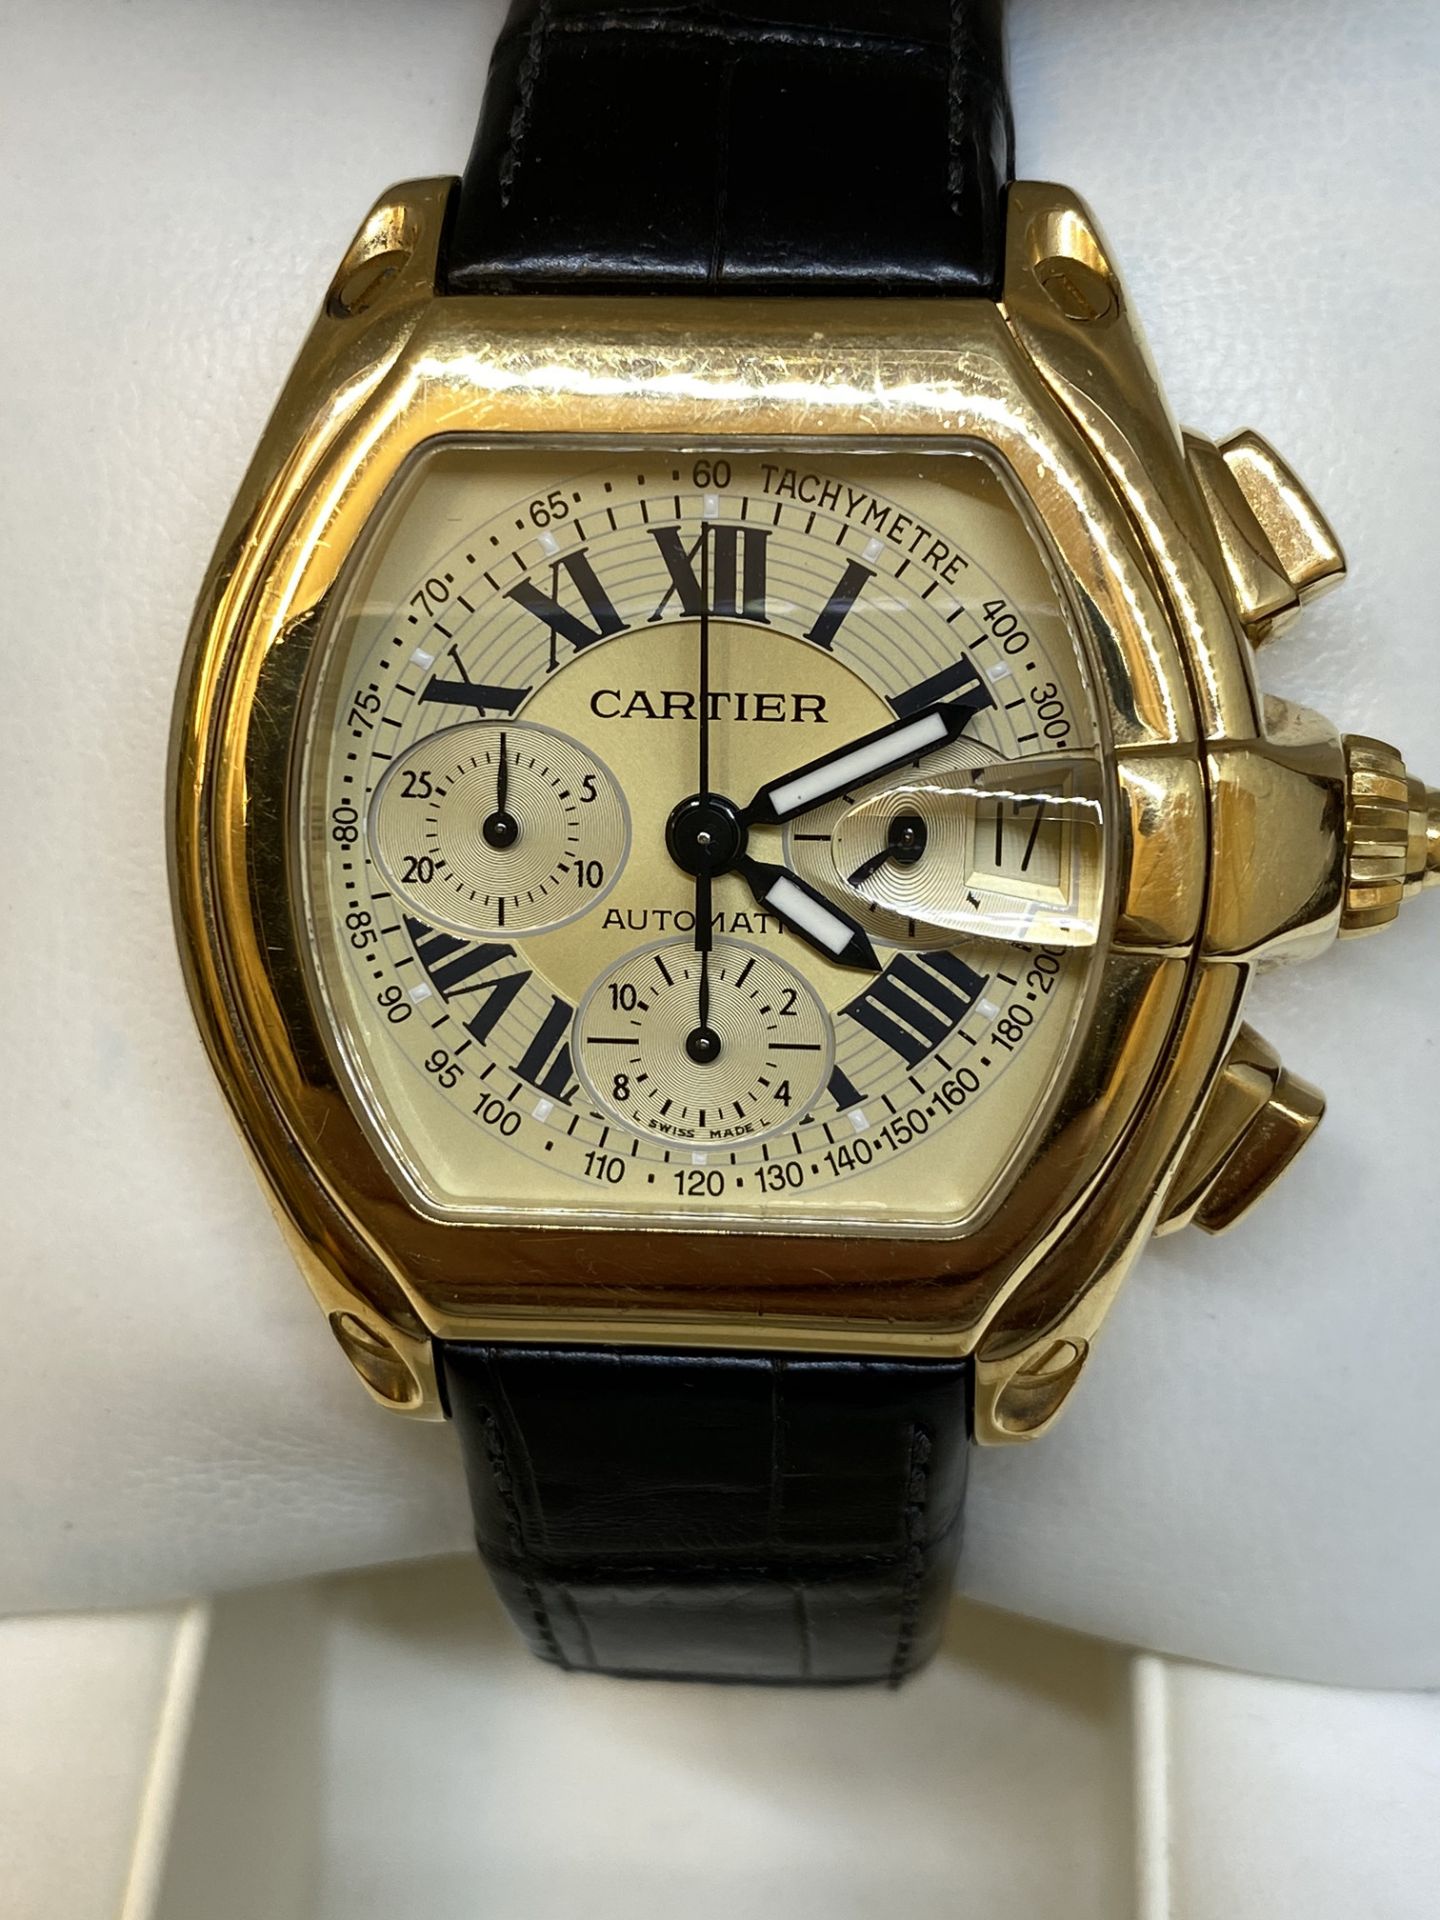 Cartier Roadster Xl Chronograph 2619 Yellow Gold 18k 48mm Automatic Watch with Box - Image 4 of 13